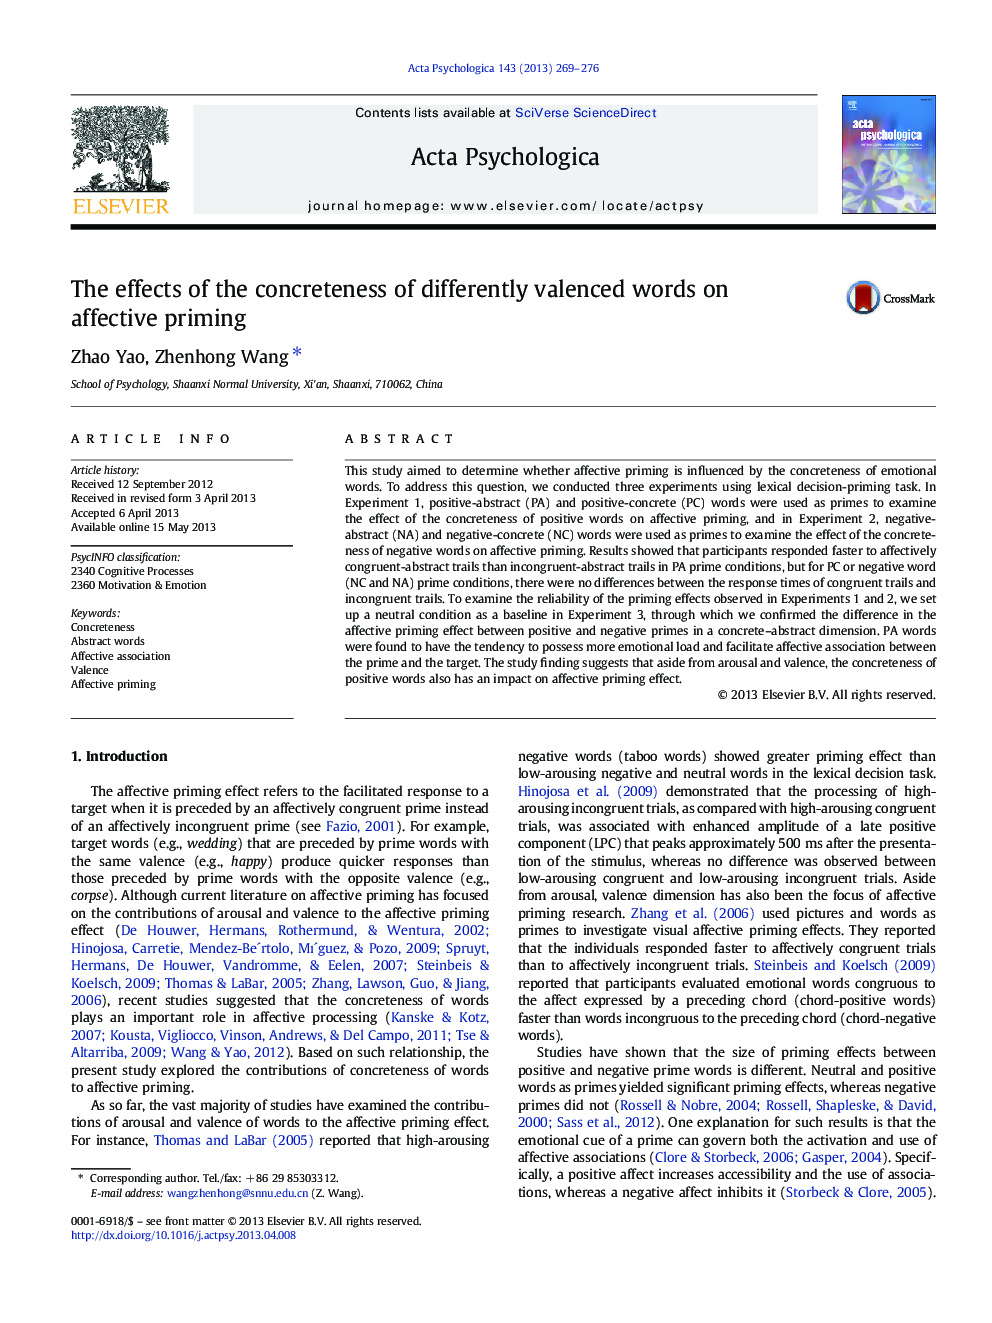 The effects of the concreteness of differently valenced words on affective priming